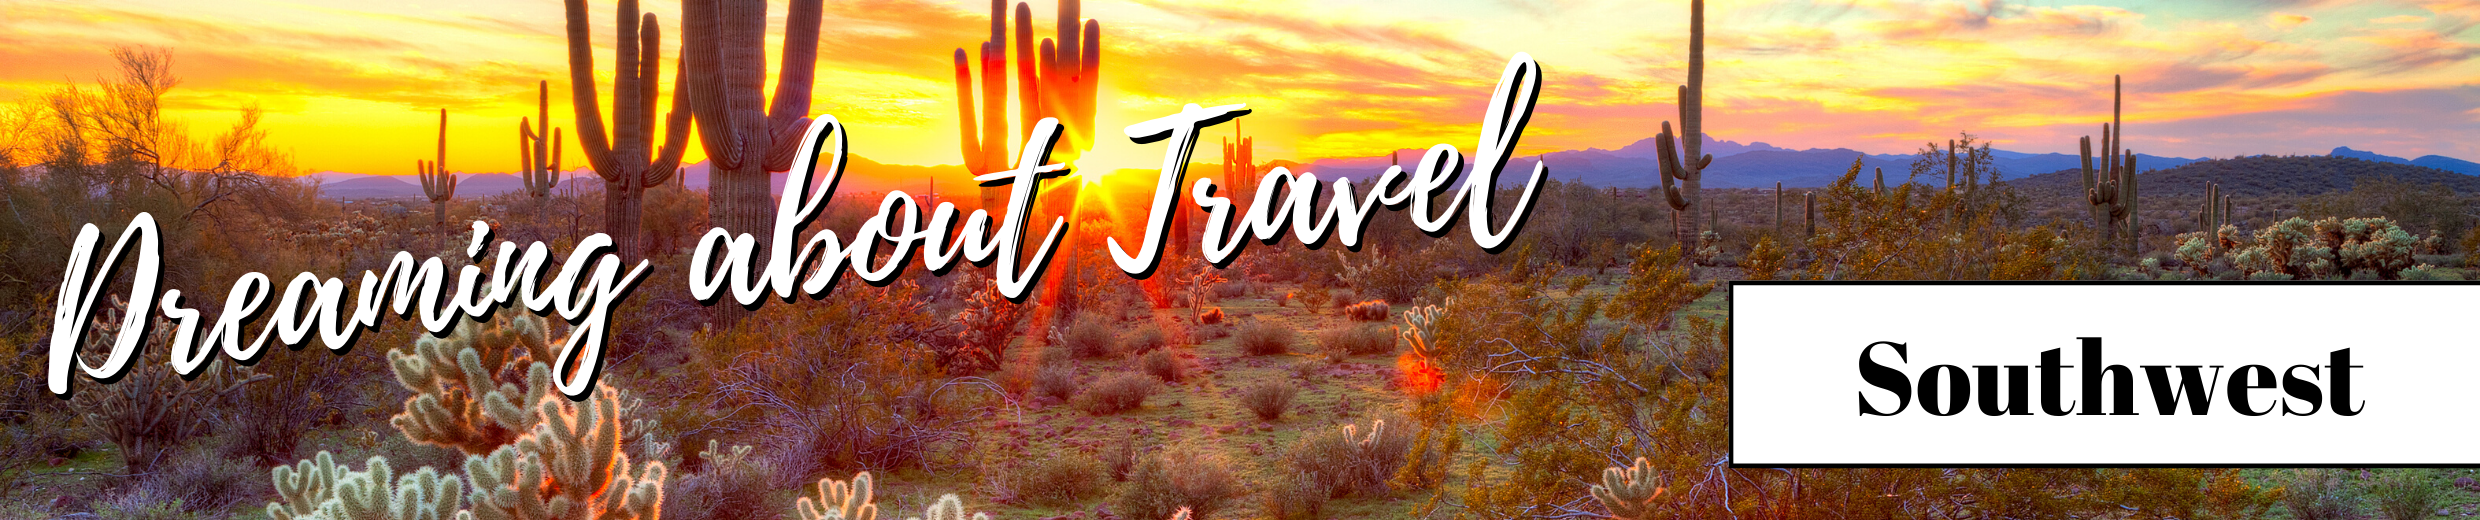 Dreaming about travel southwest